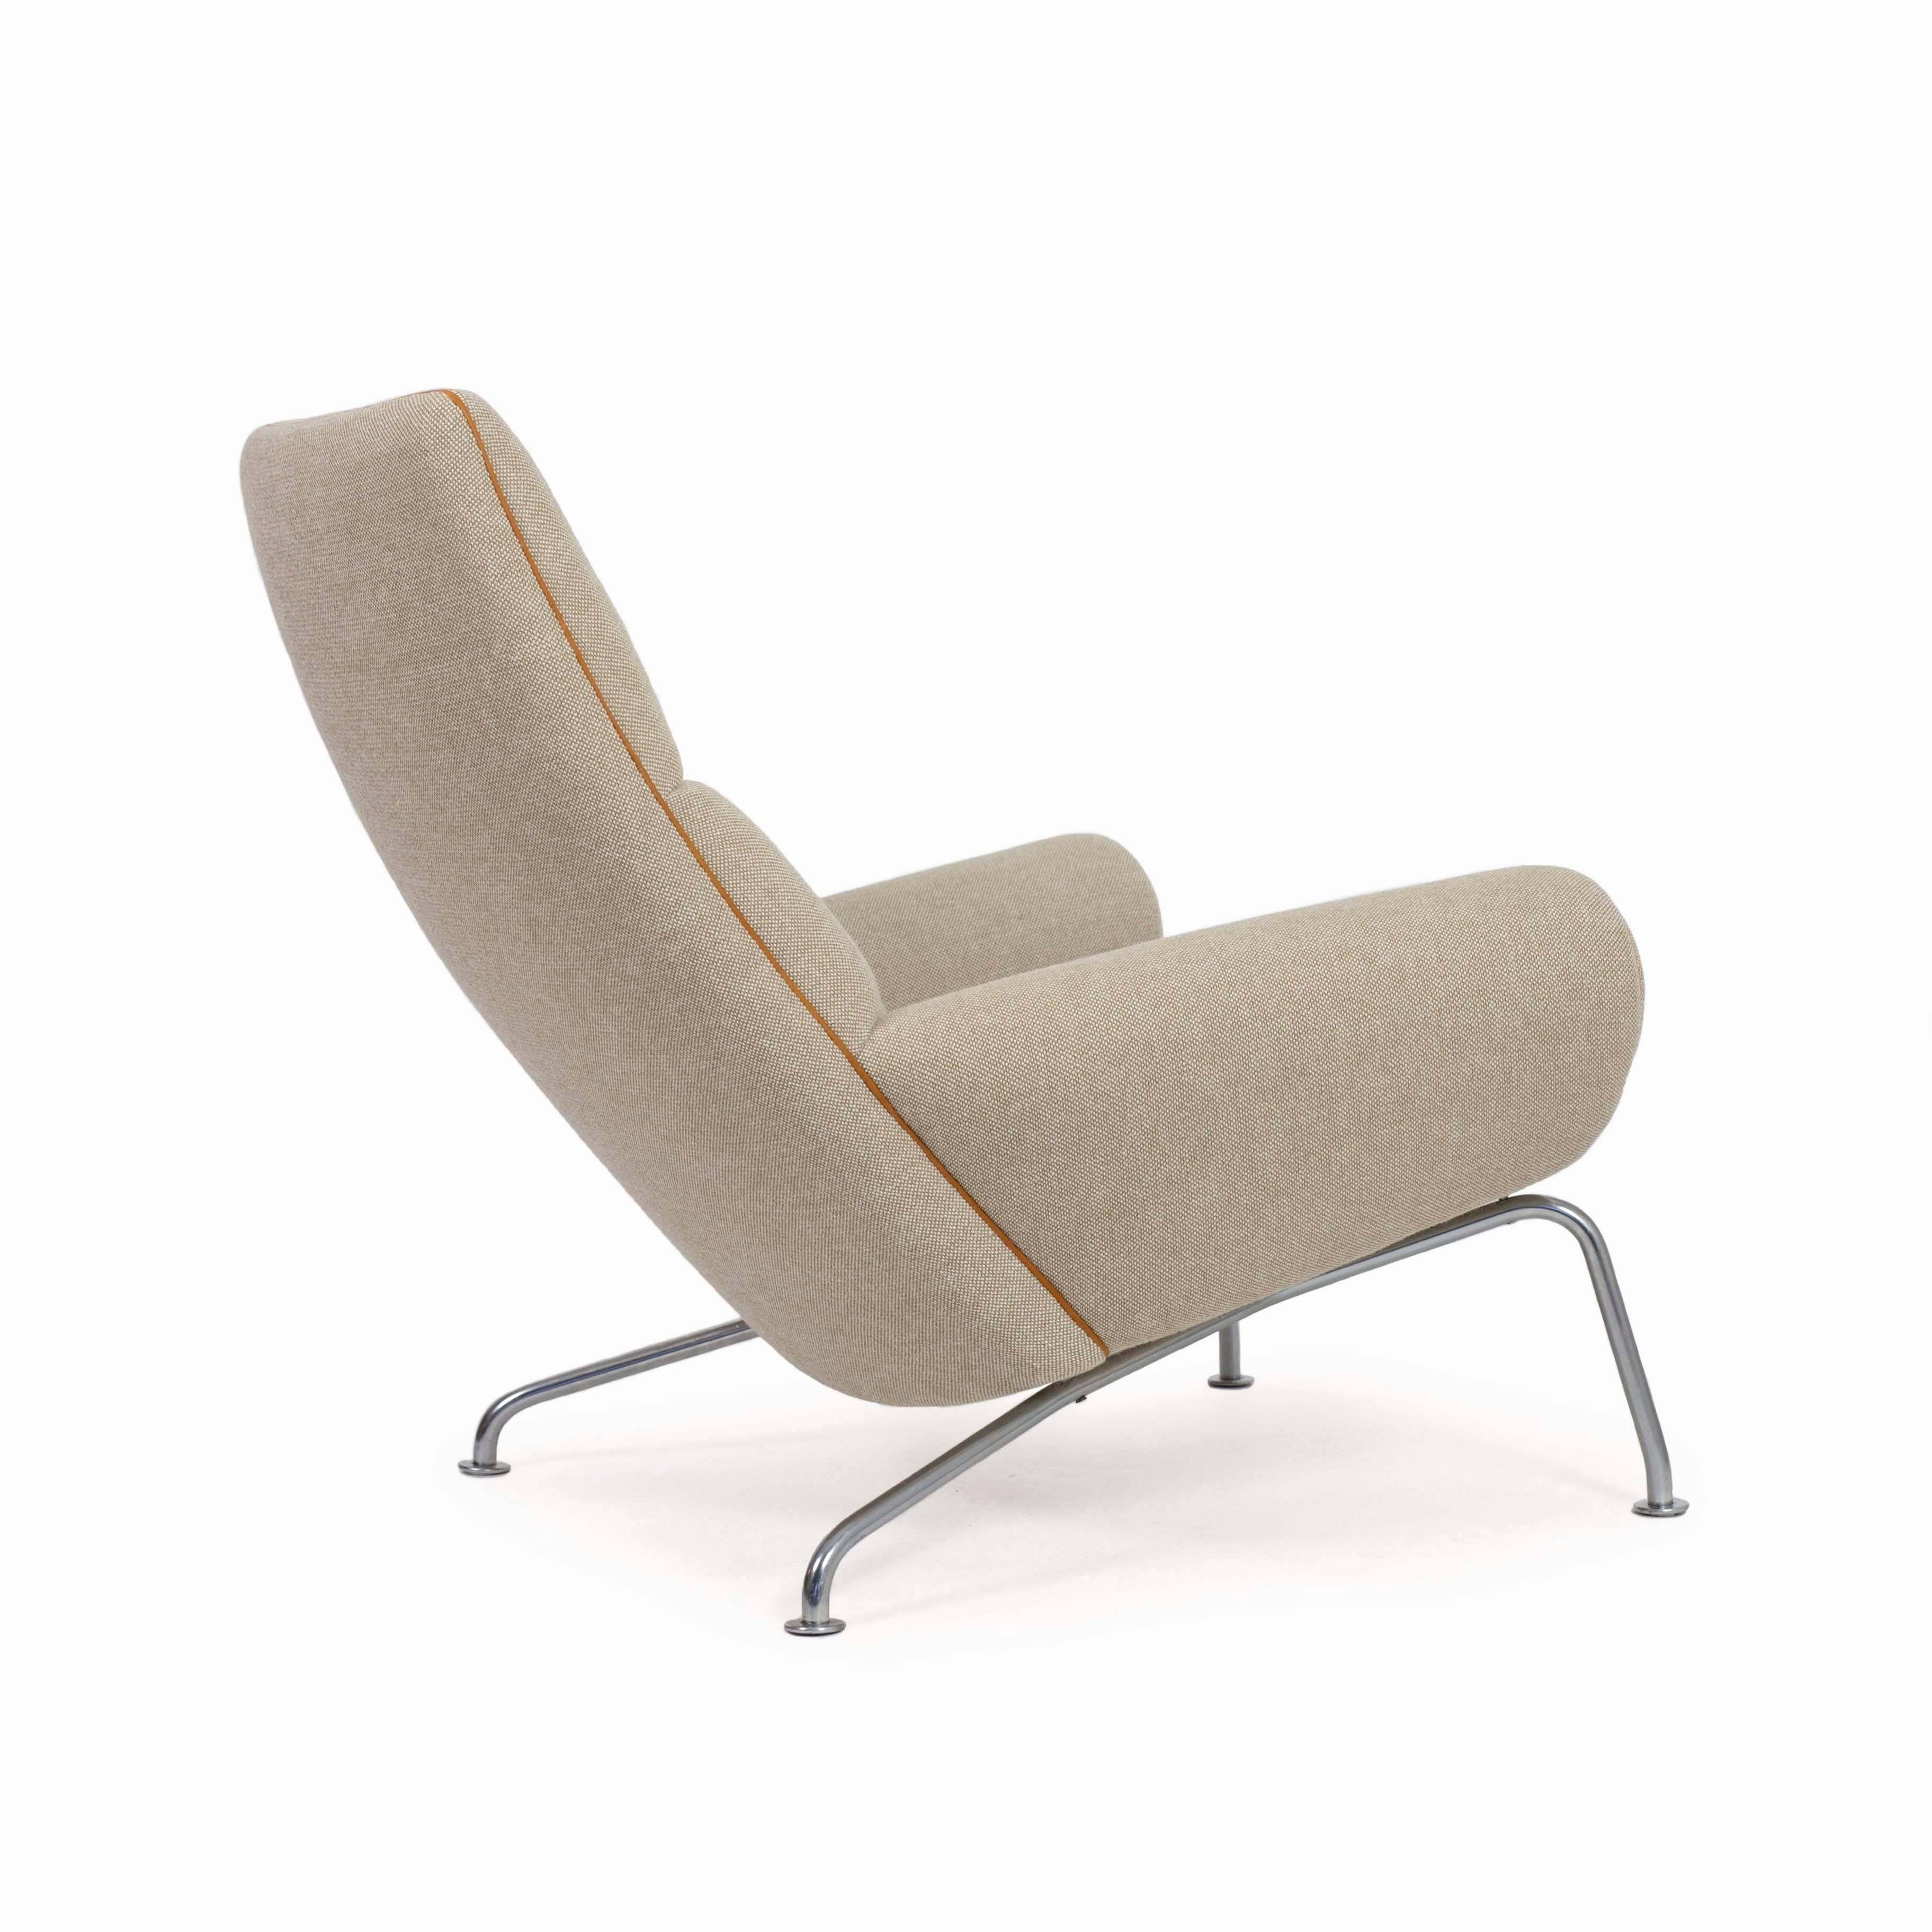 Hans J. Wegner ox chair with tubular steel frame upholstered with light fabric and leather pipings. Designed 1960 and made at AP Stolen, Denmark model AP49. 
Very fine restored condition.

Available as a pair. 
Contact Galleri Feldt for